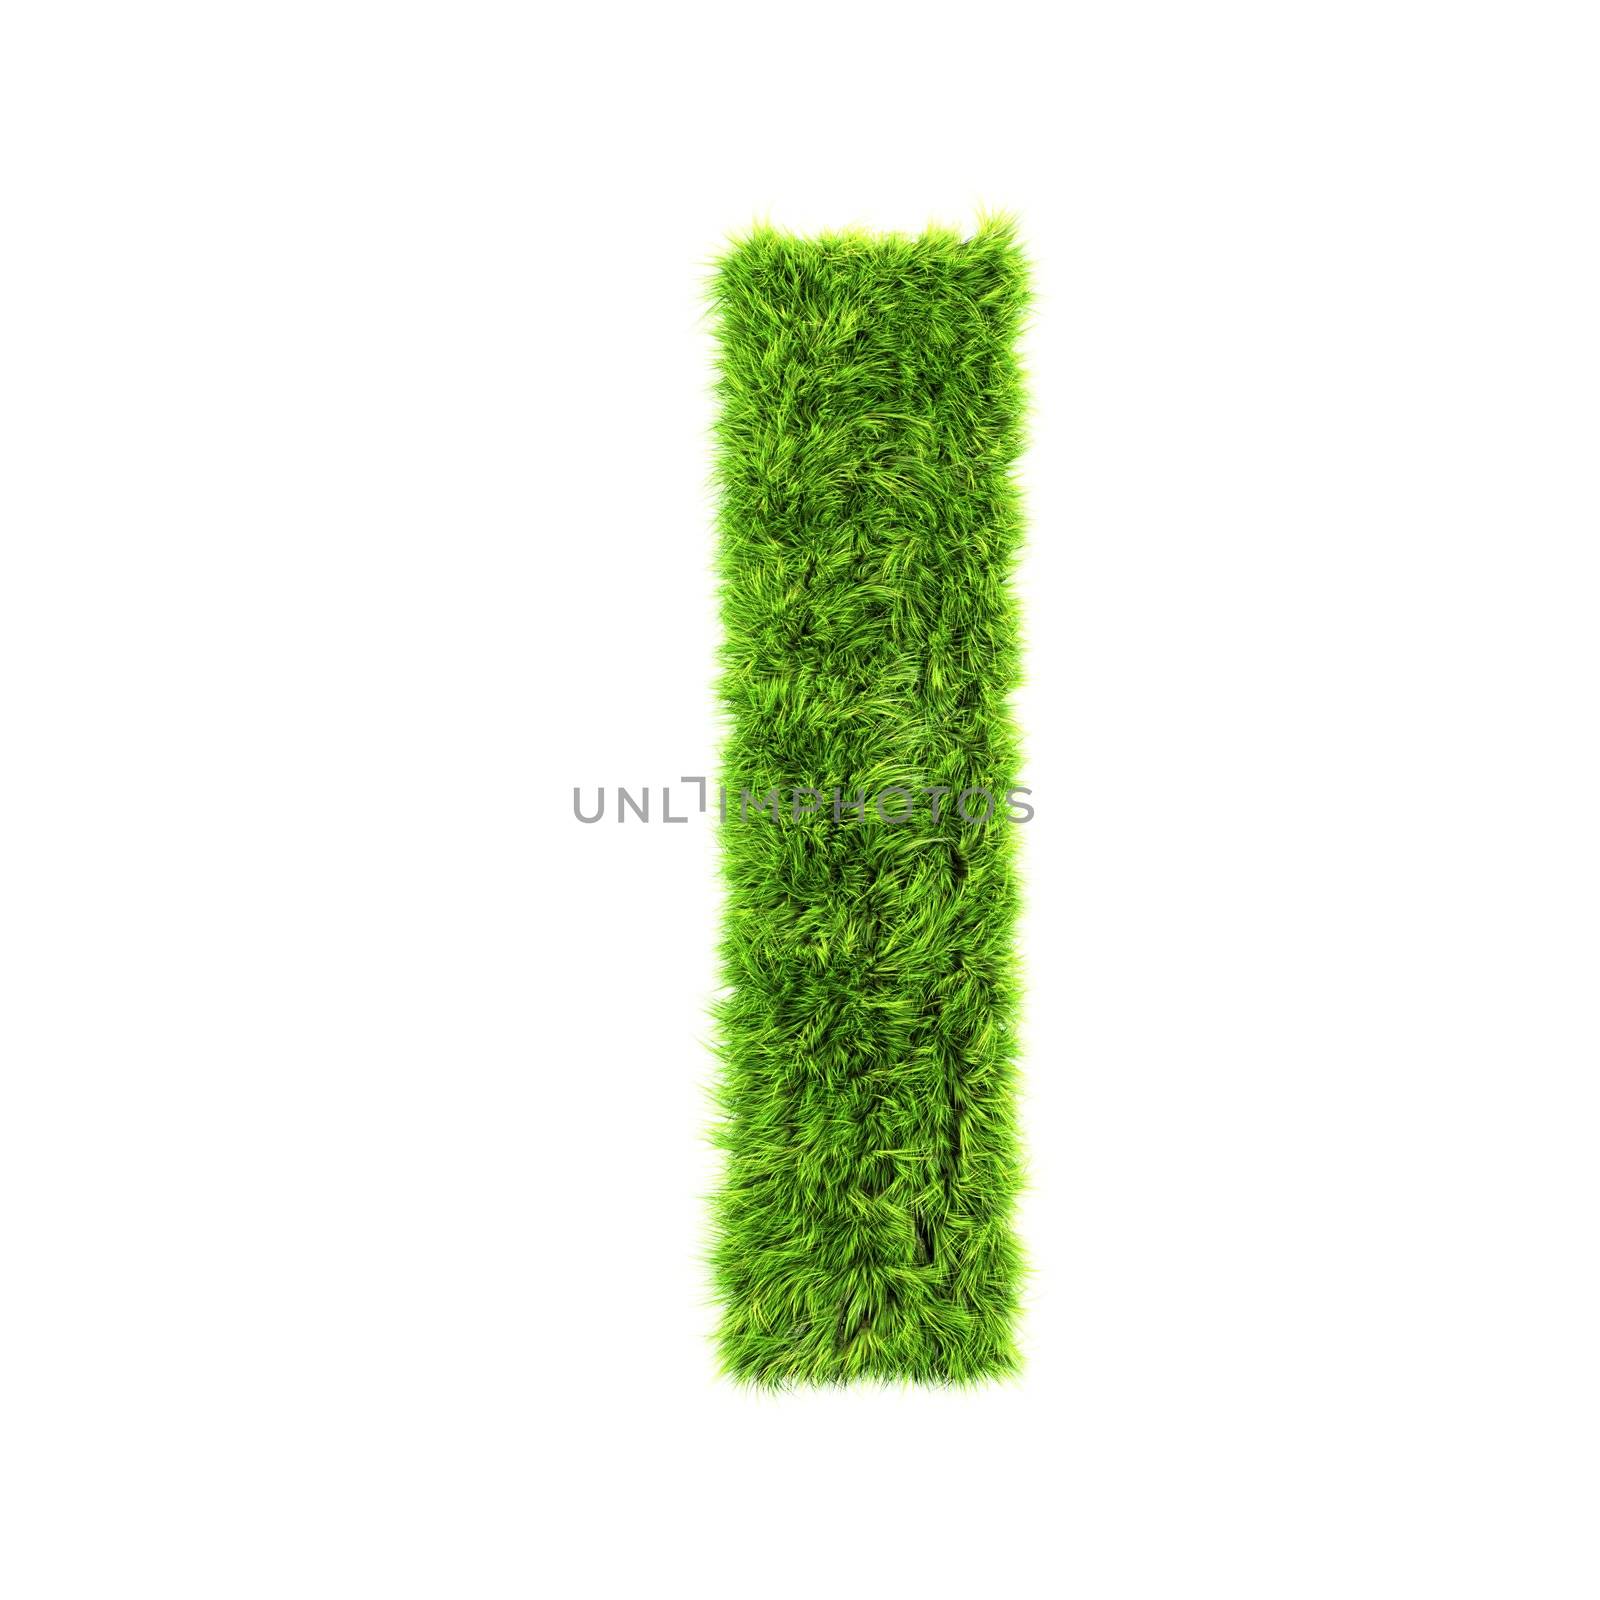 3d grass letter isolated on white background - l